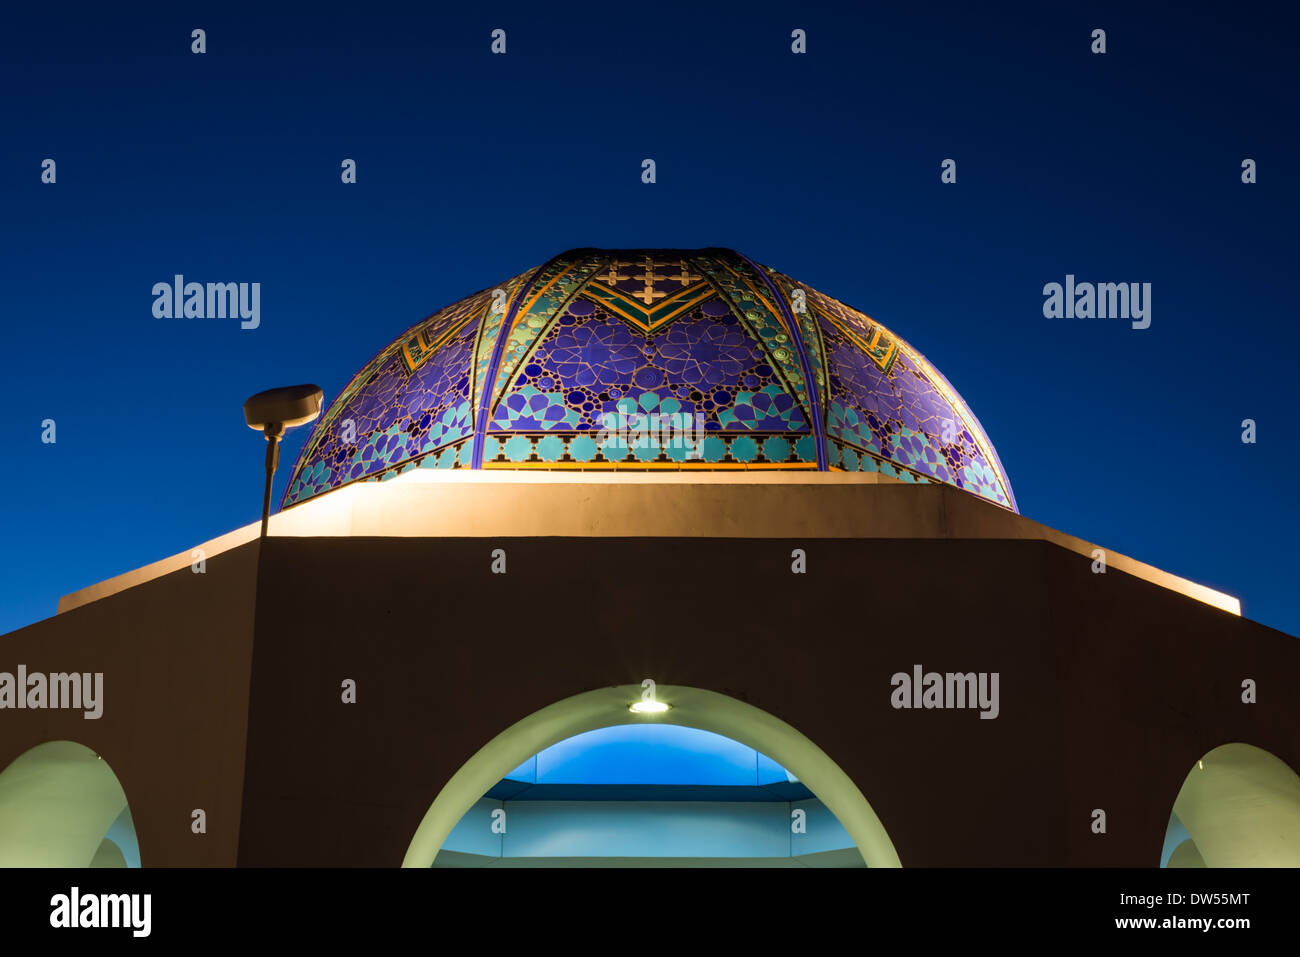 Focus on the domed building located at the Cancer Survivor Park. San Diego,California, United States. Stock Photo